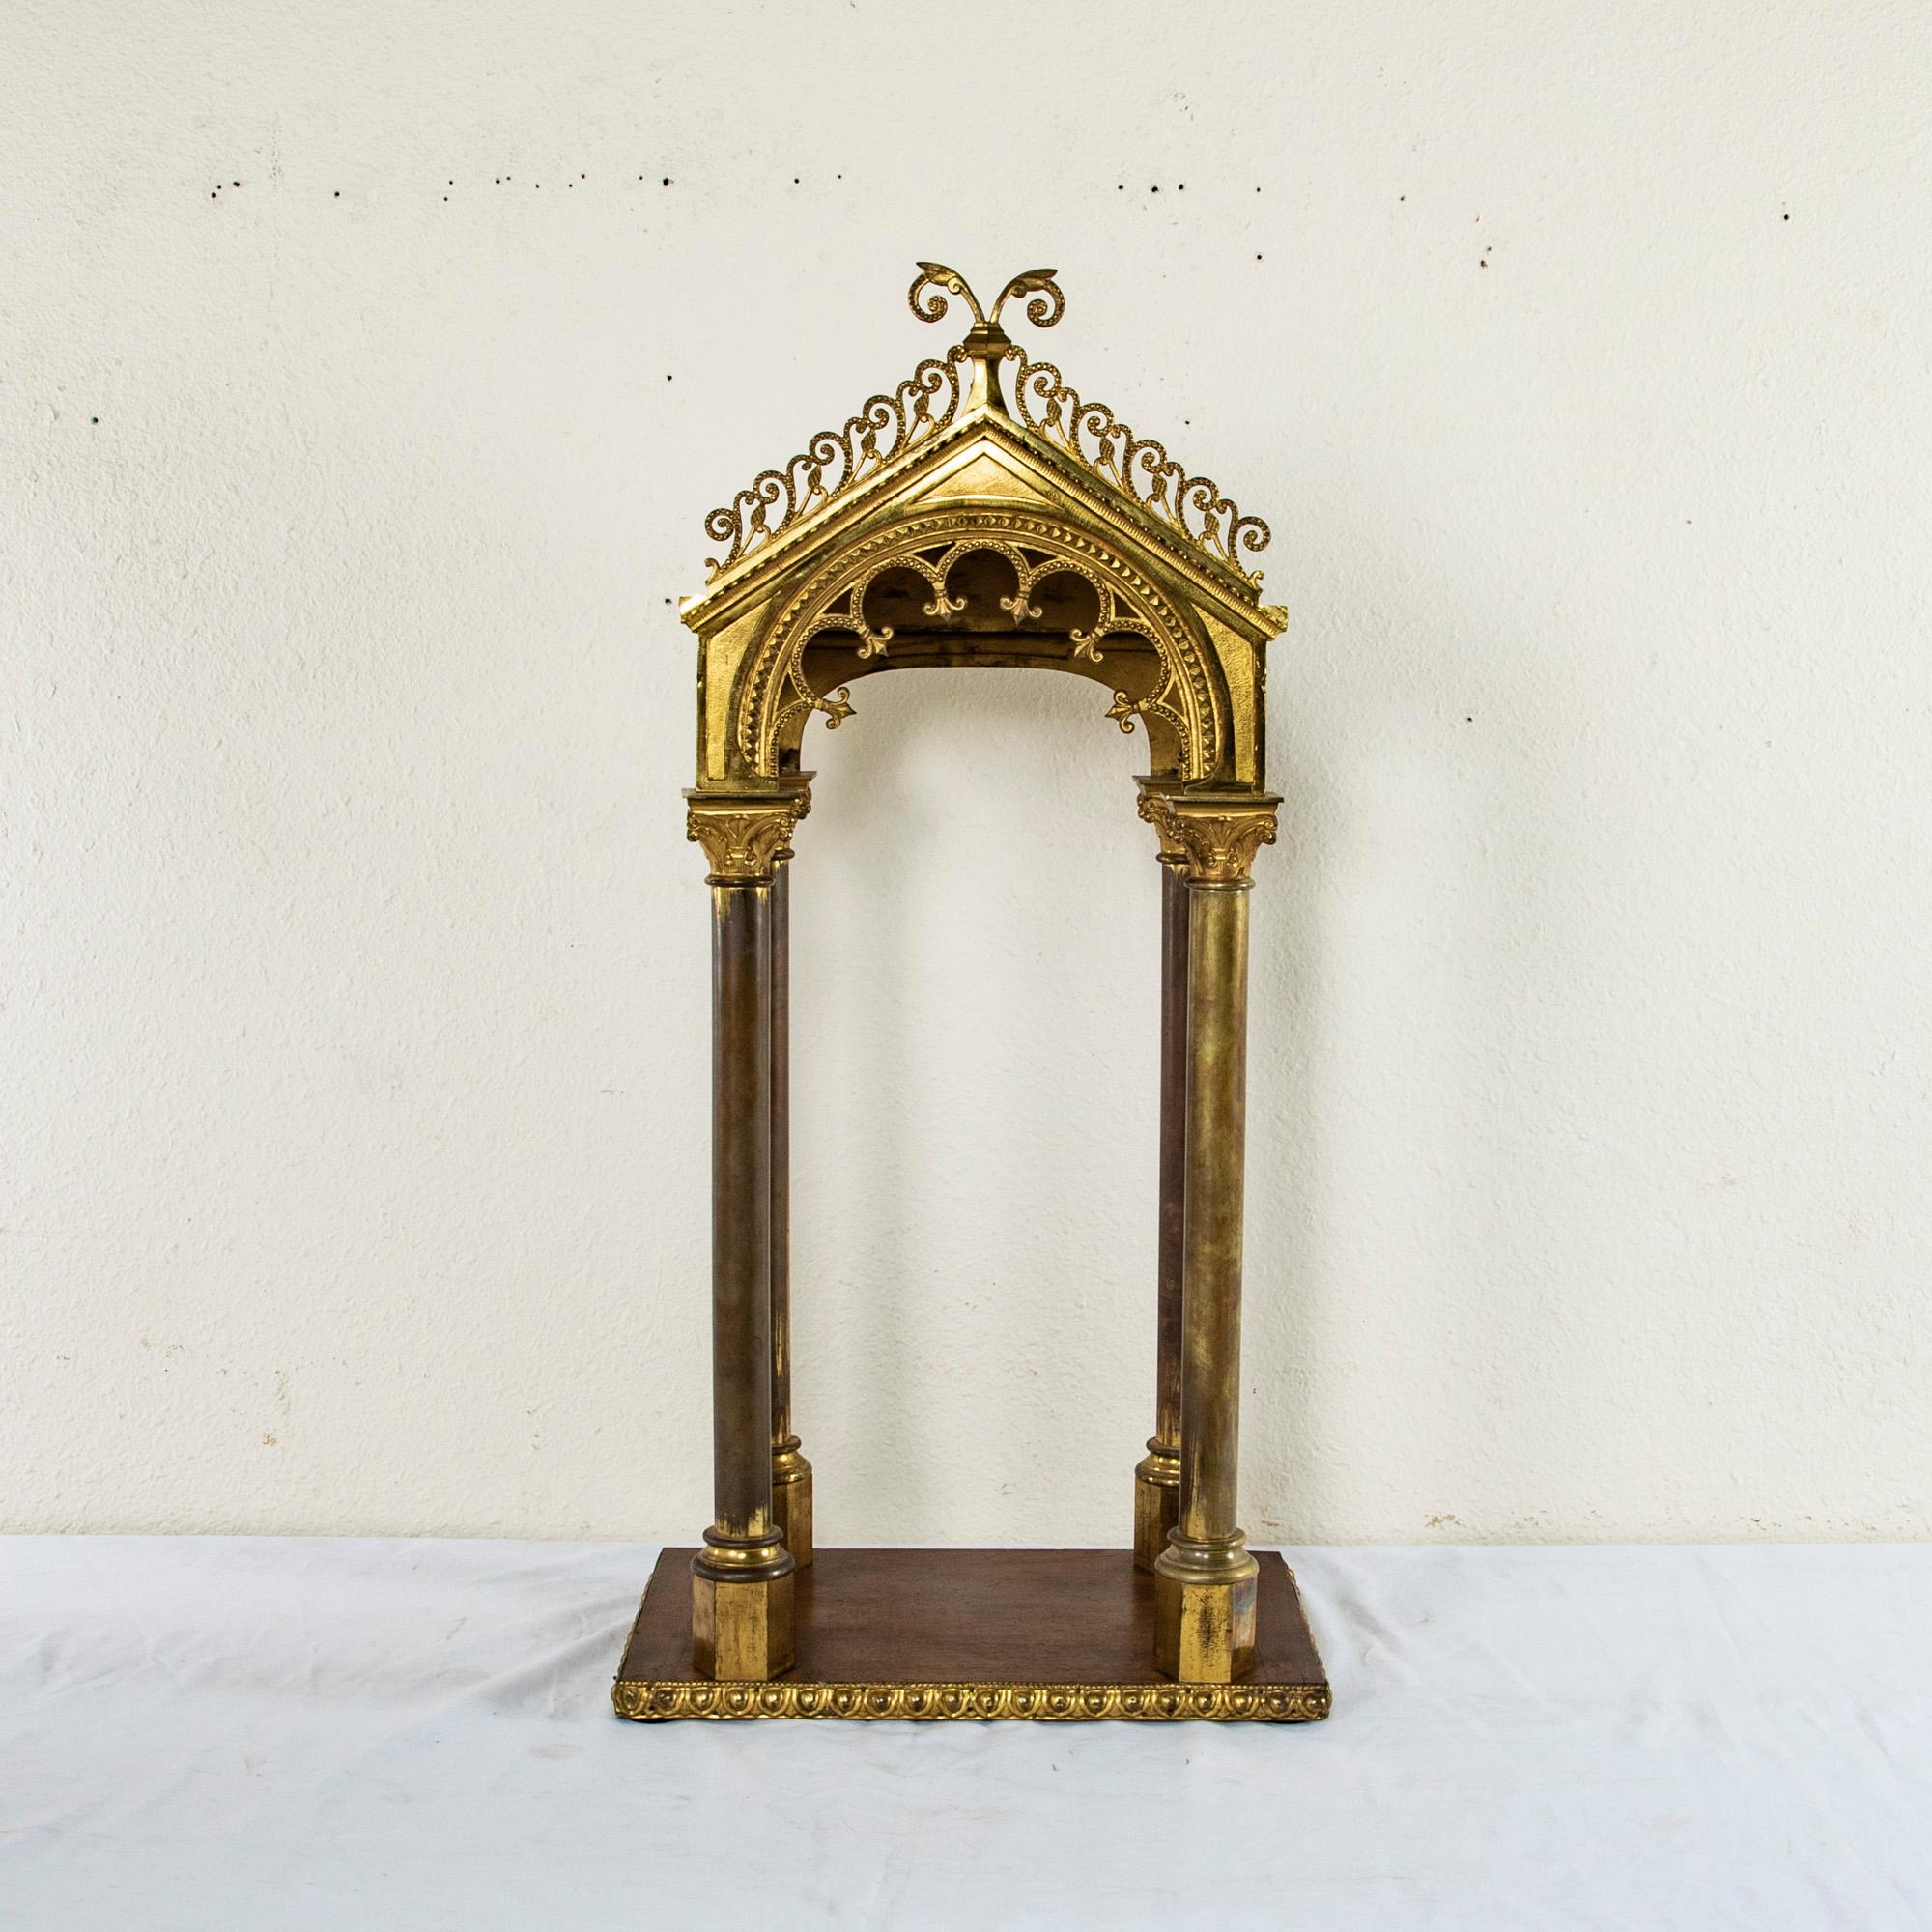 Standing at 39 inches in height, this large brass and wooden altar piece was originally used in an Italian church to display a statue. The roof of the altar piece is held up by four Corinthian columns that rest on a wooden base. The sides of the